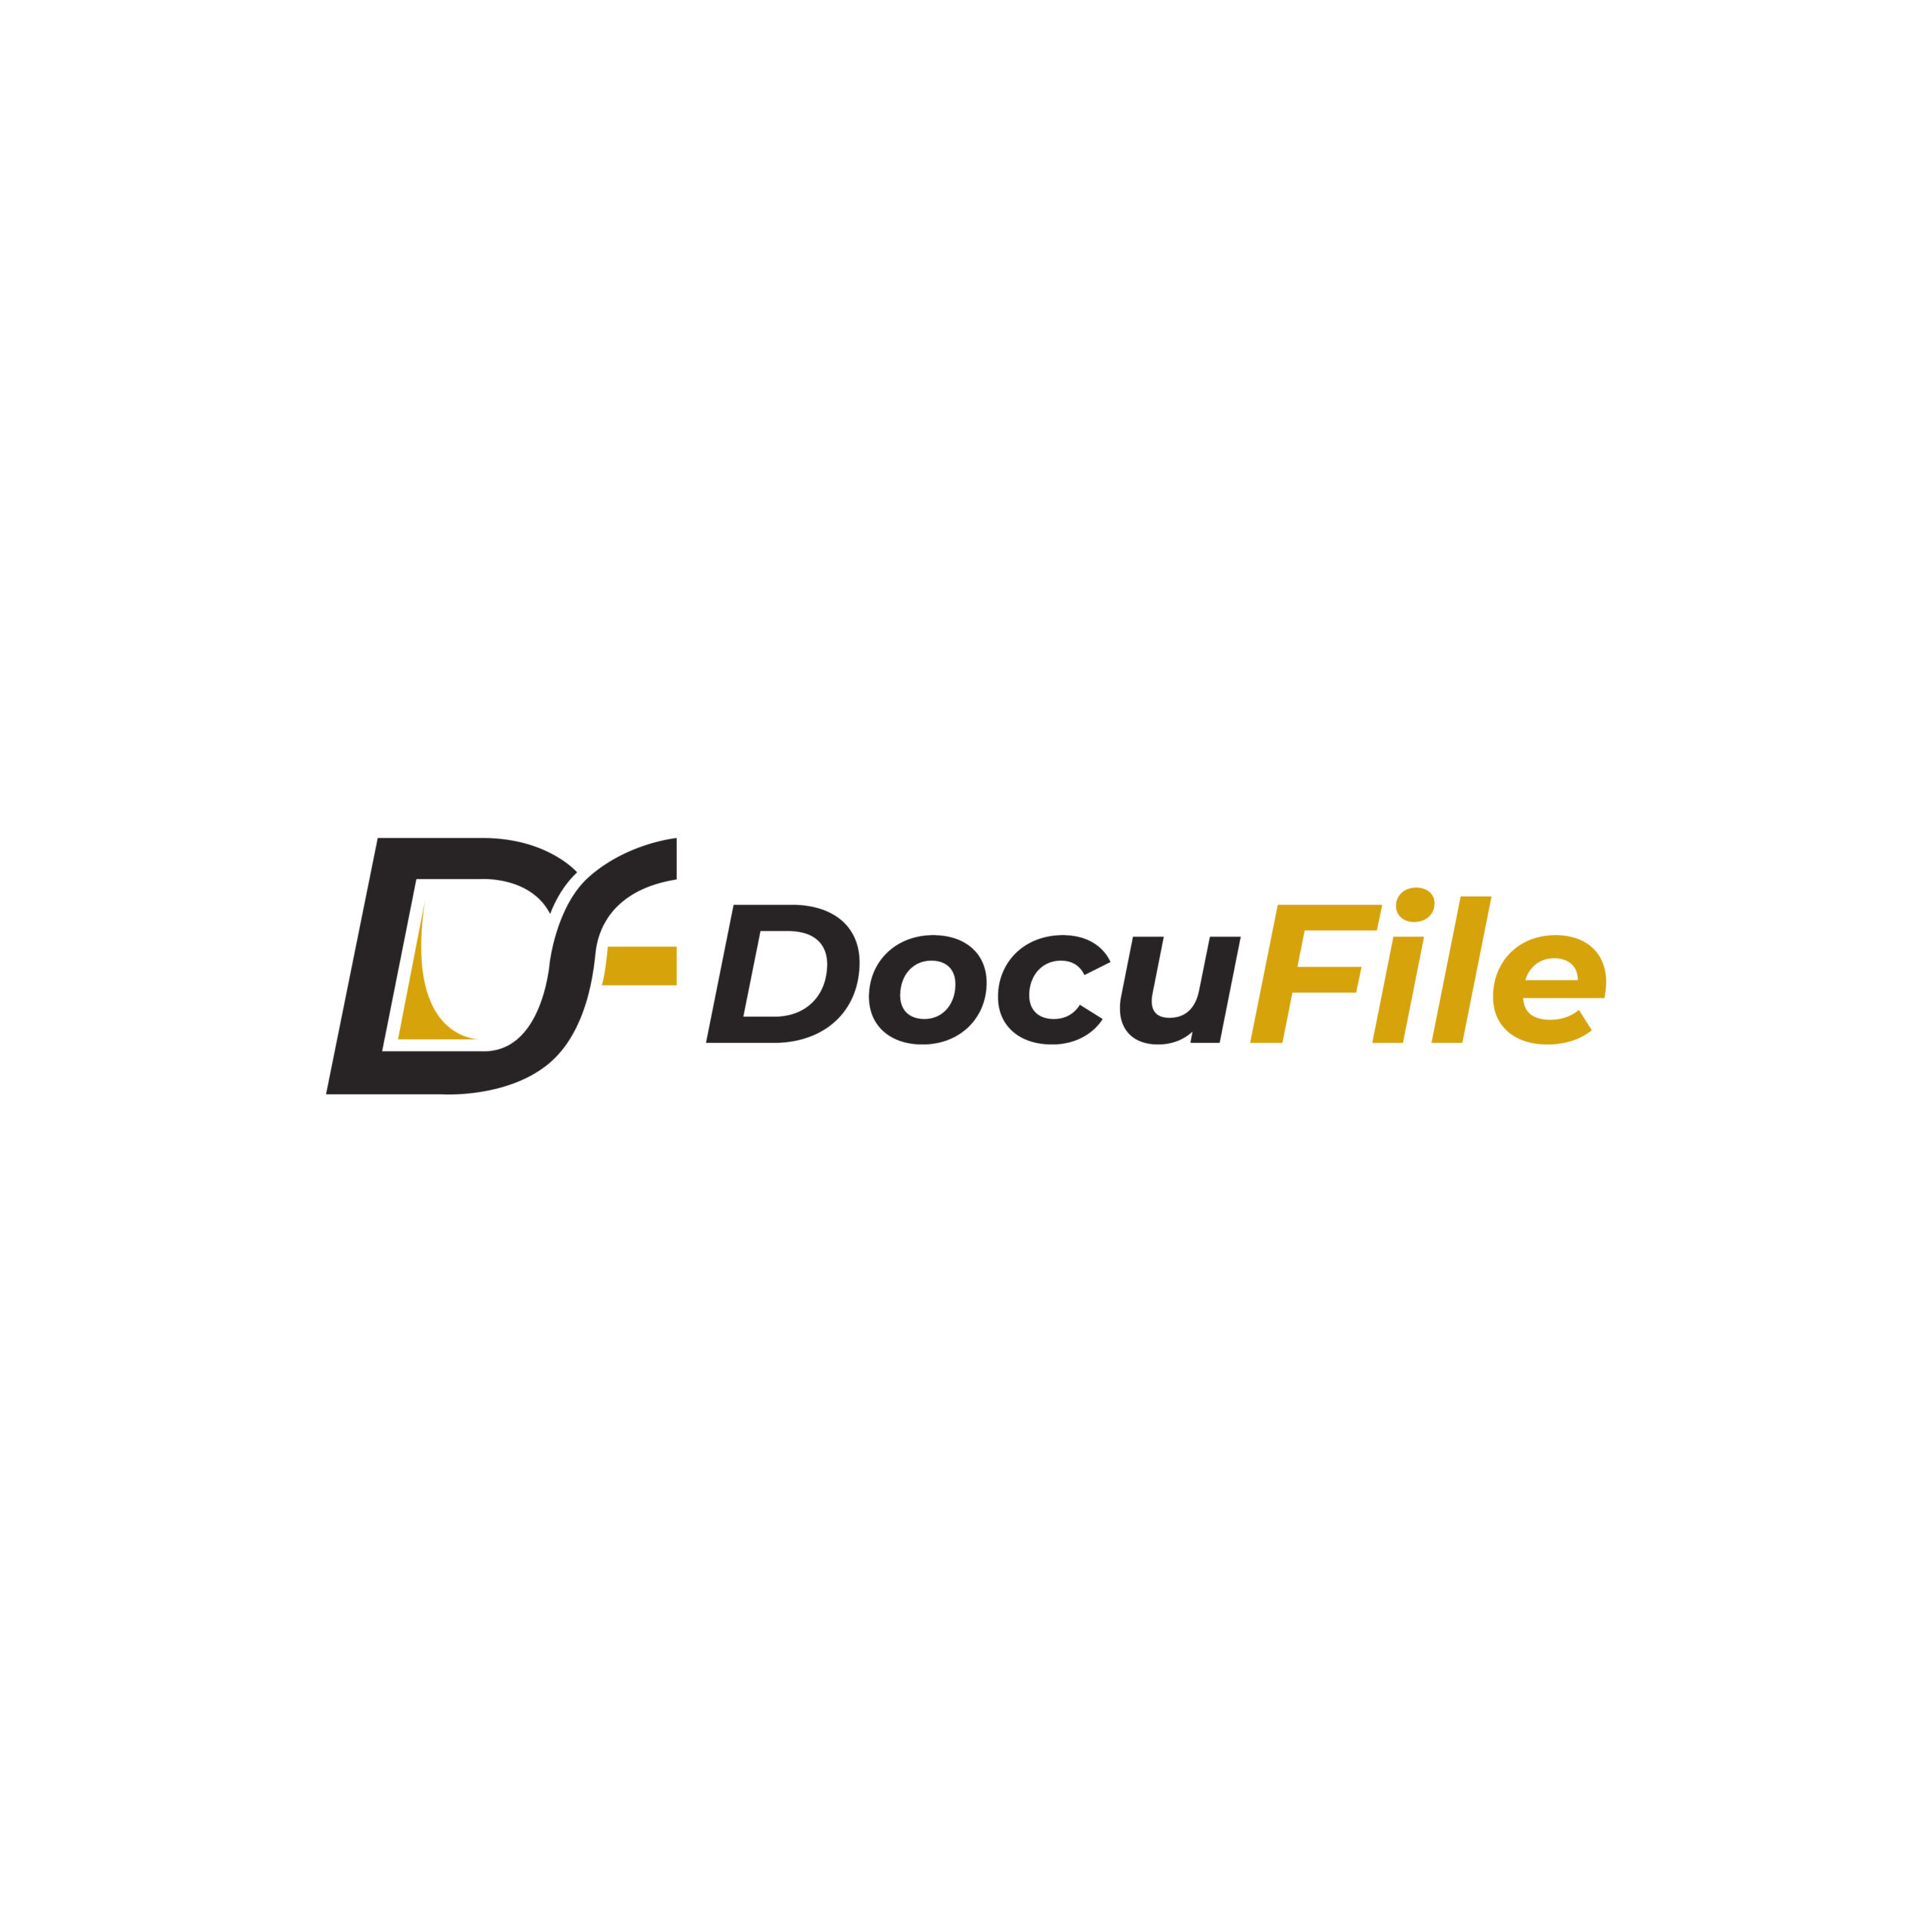  DocuFile